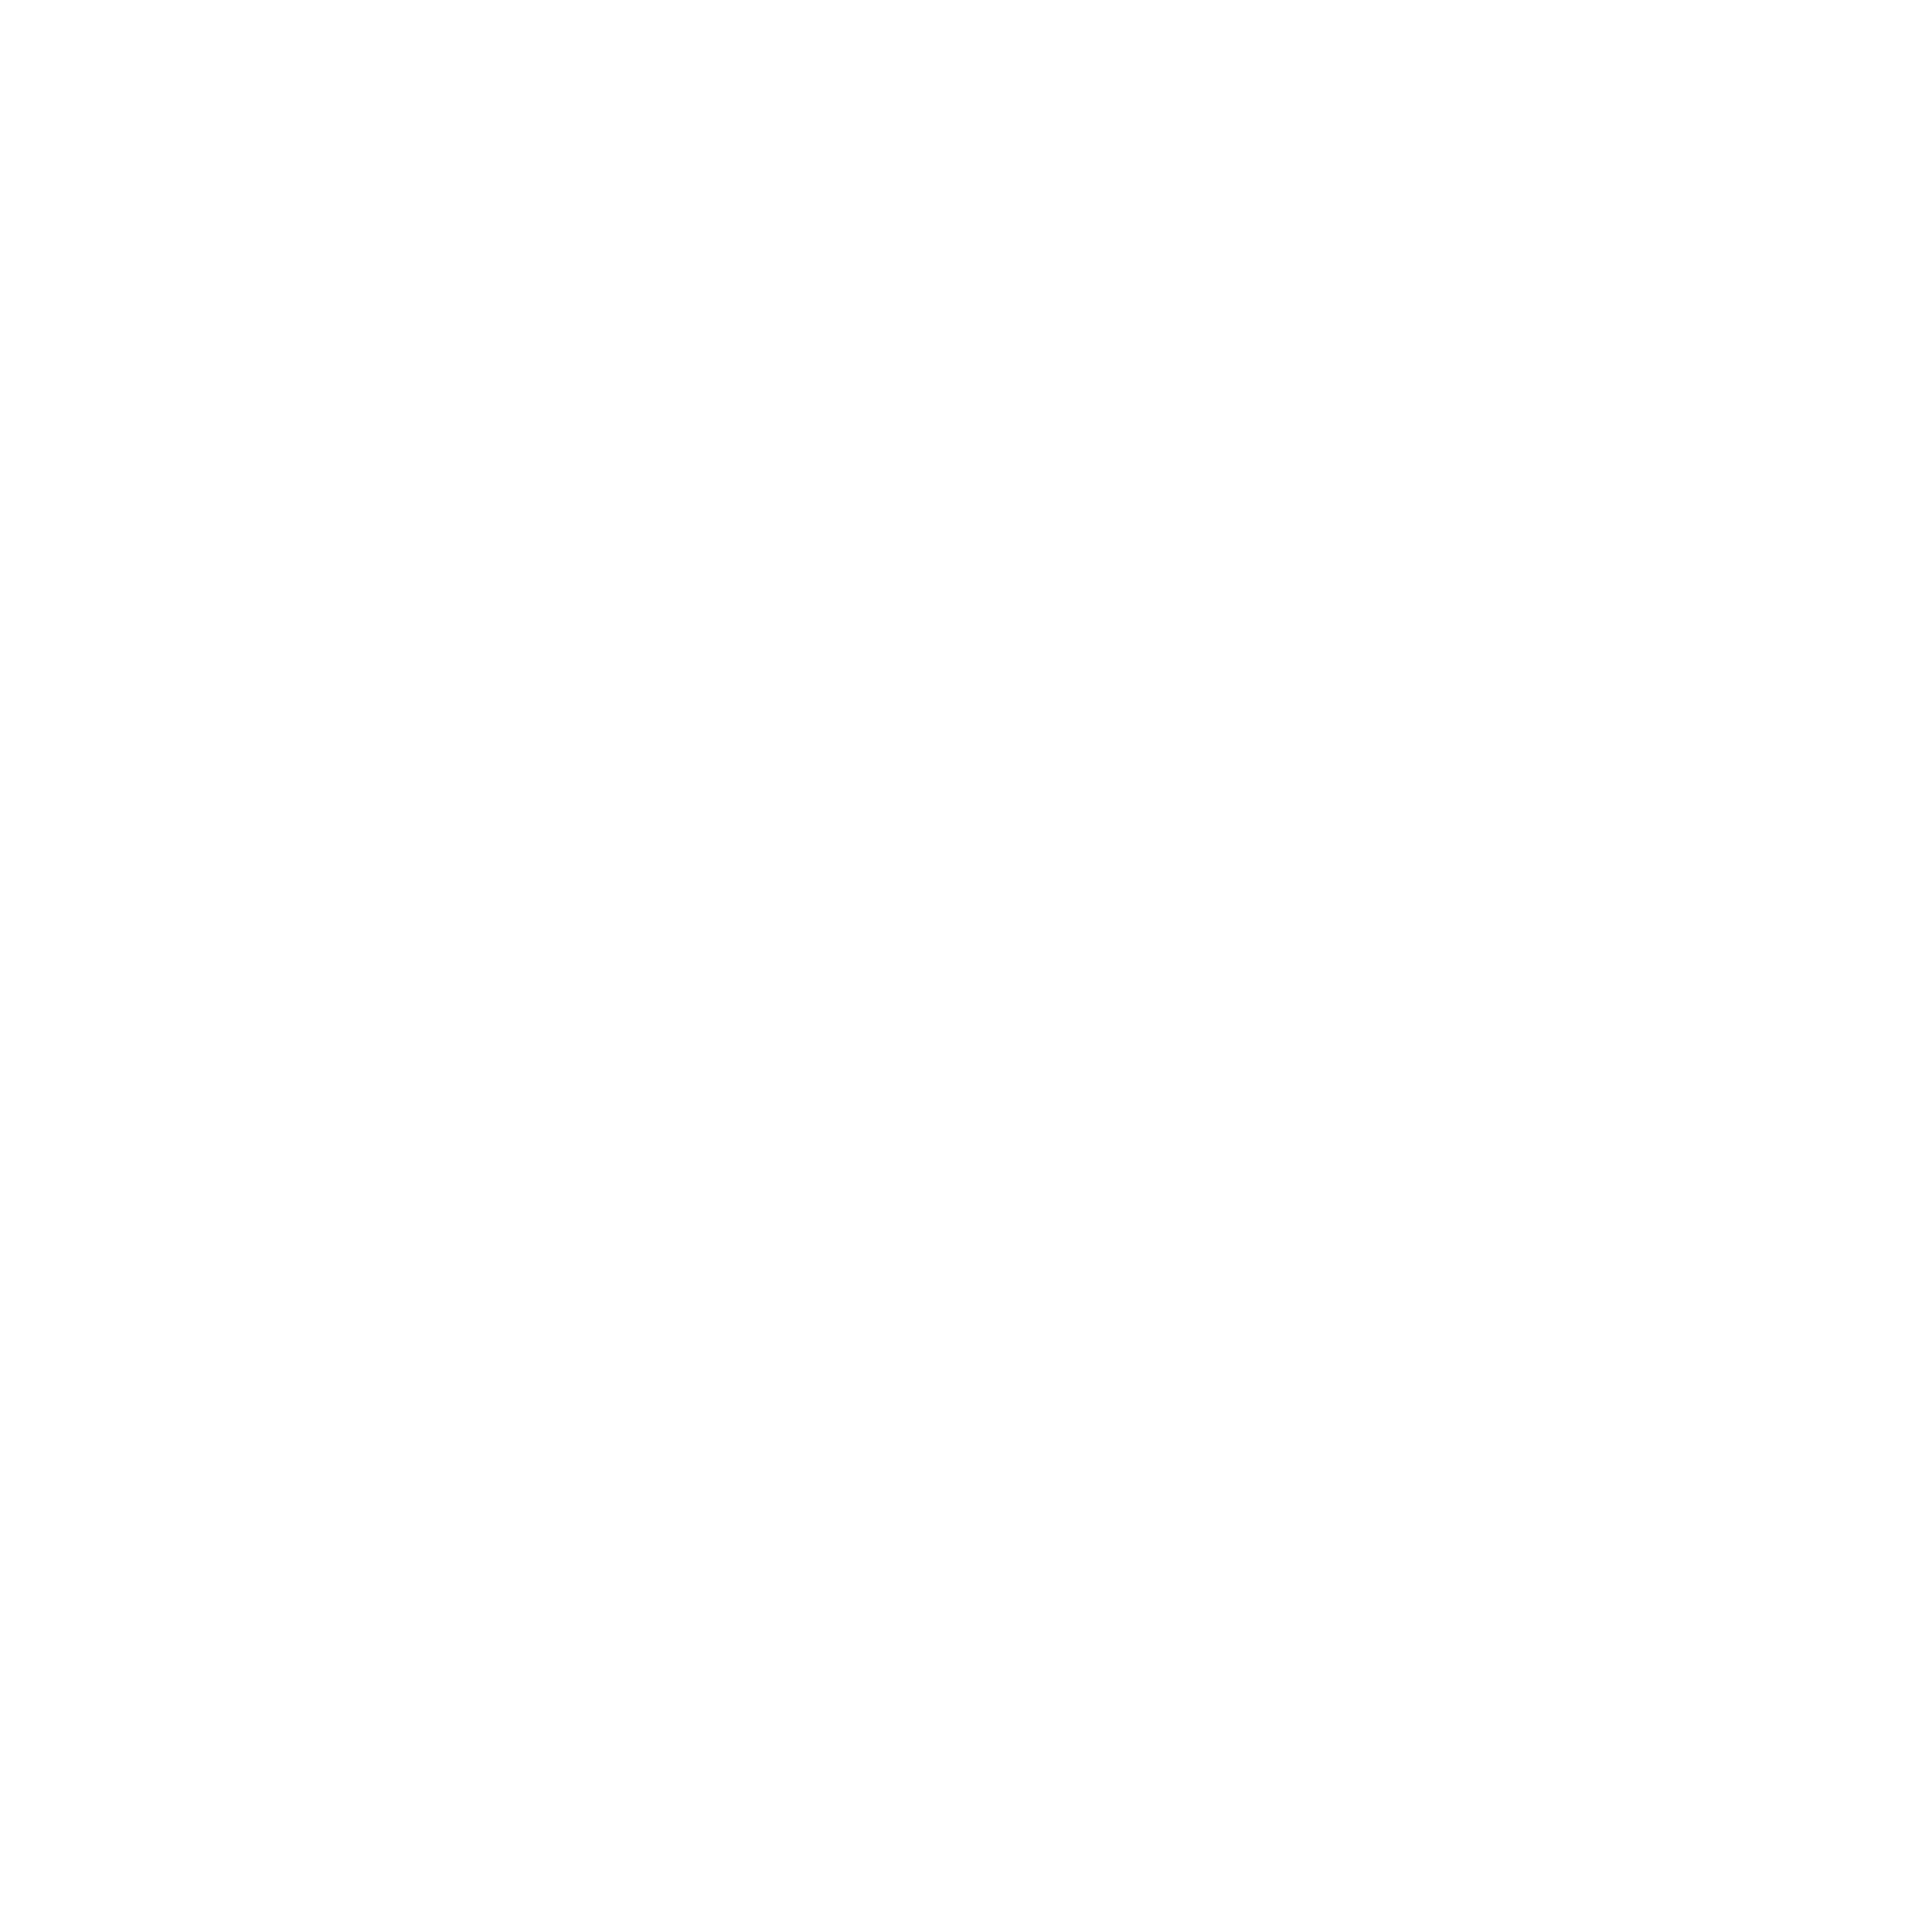 The mountains of France!